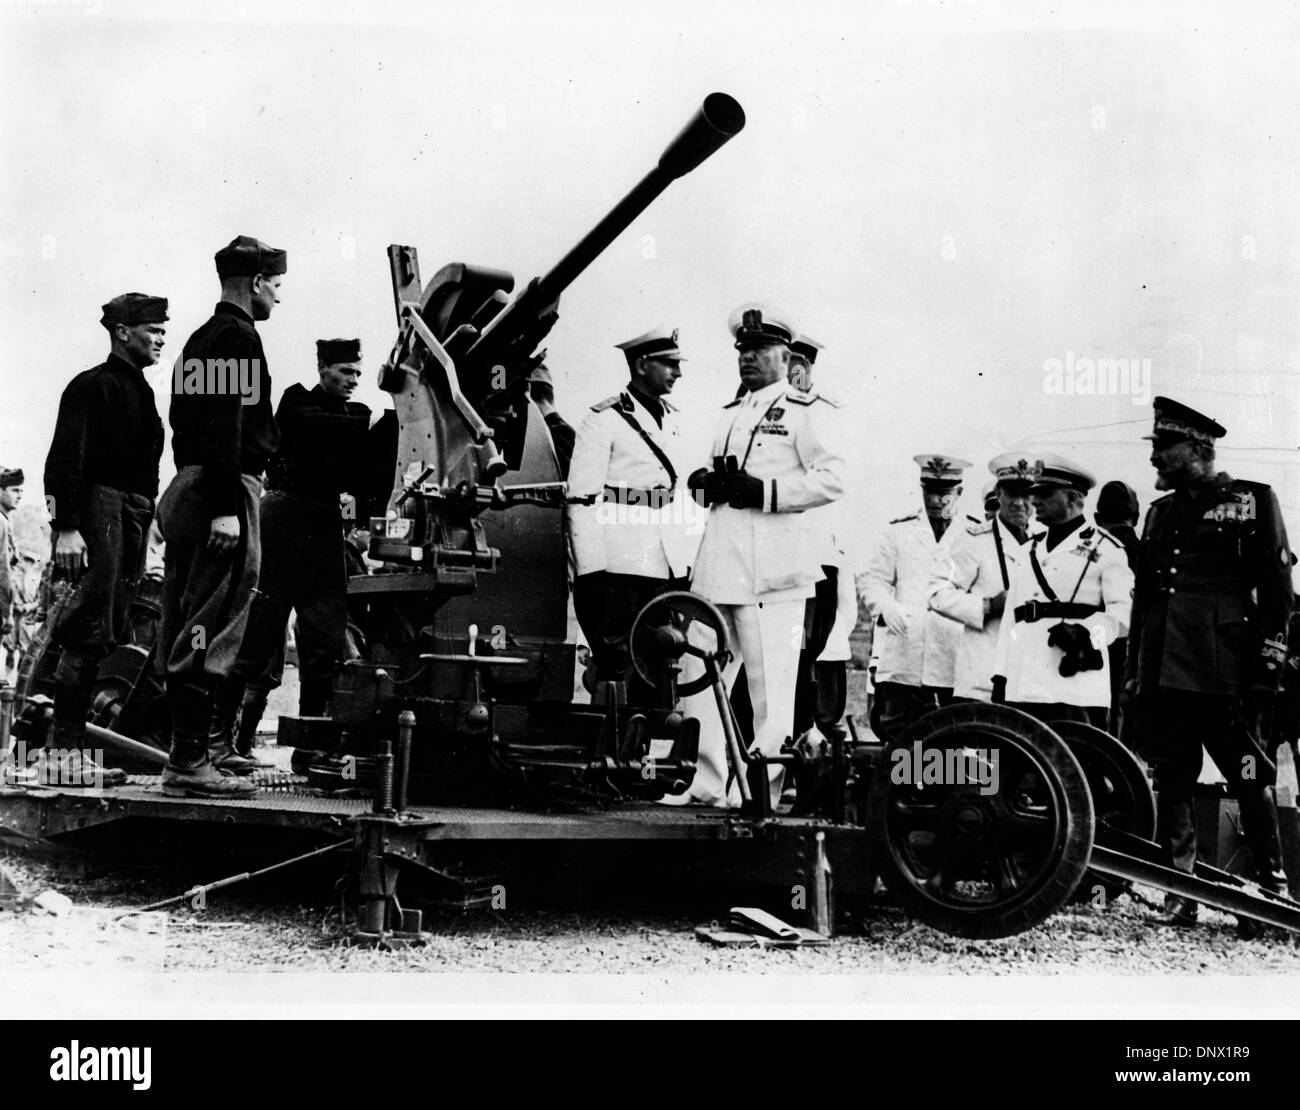 March 13, 1933 - Rome, Italy - BENITO MUSSOLINI (1883-1945) the Italian dictator and leader of the Fascist movement at an artillery excercise at Anzio. (Credit Image: © KEYSTONE Pictures USA/ZUMAPRESS.com) Stock Photo